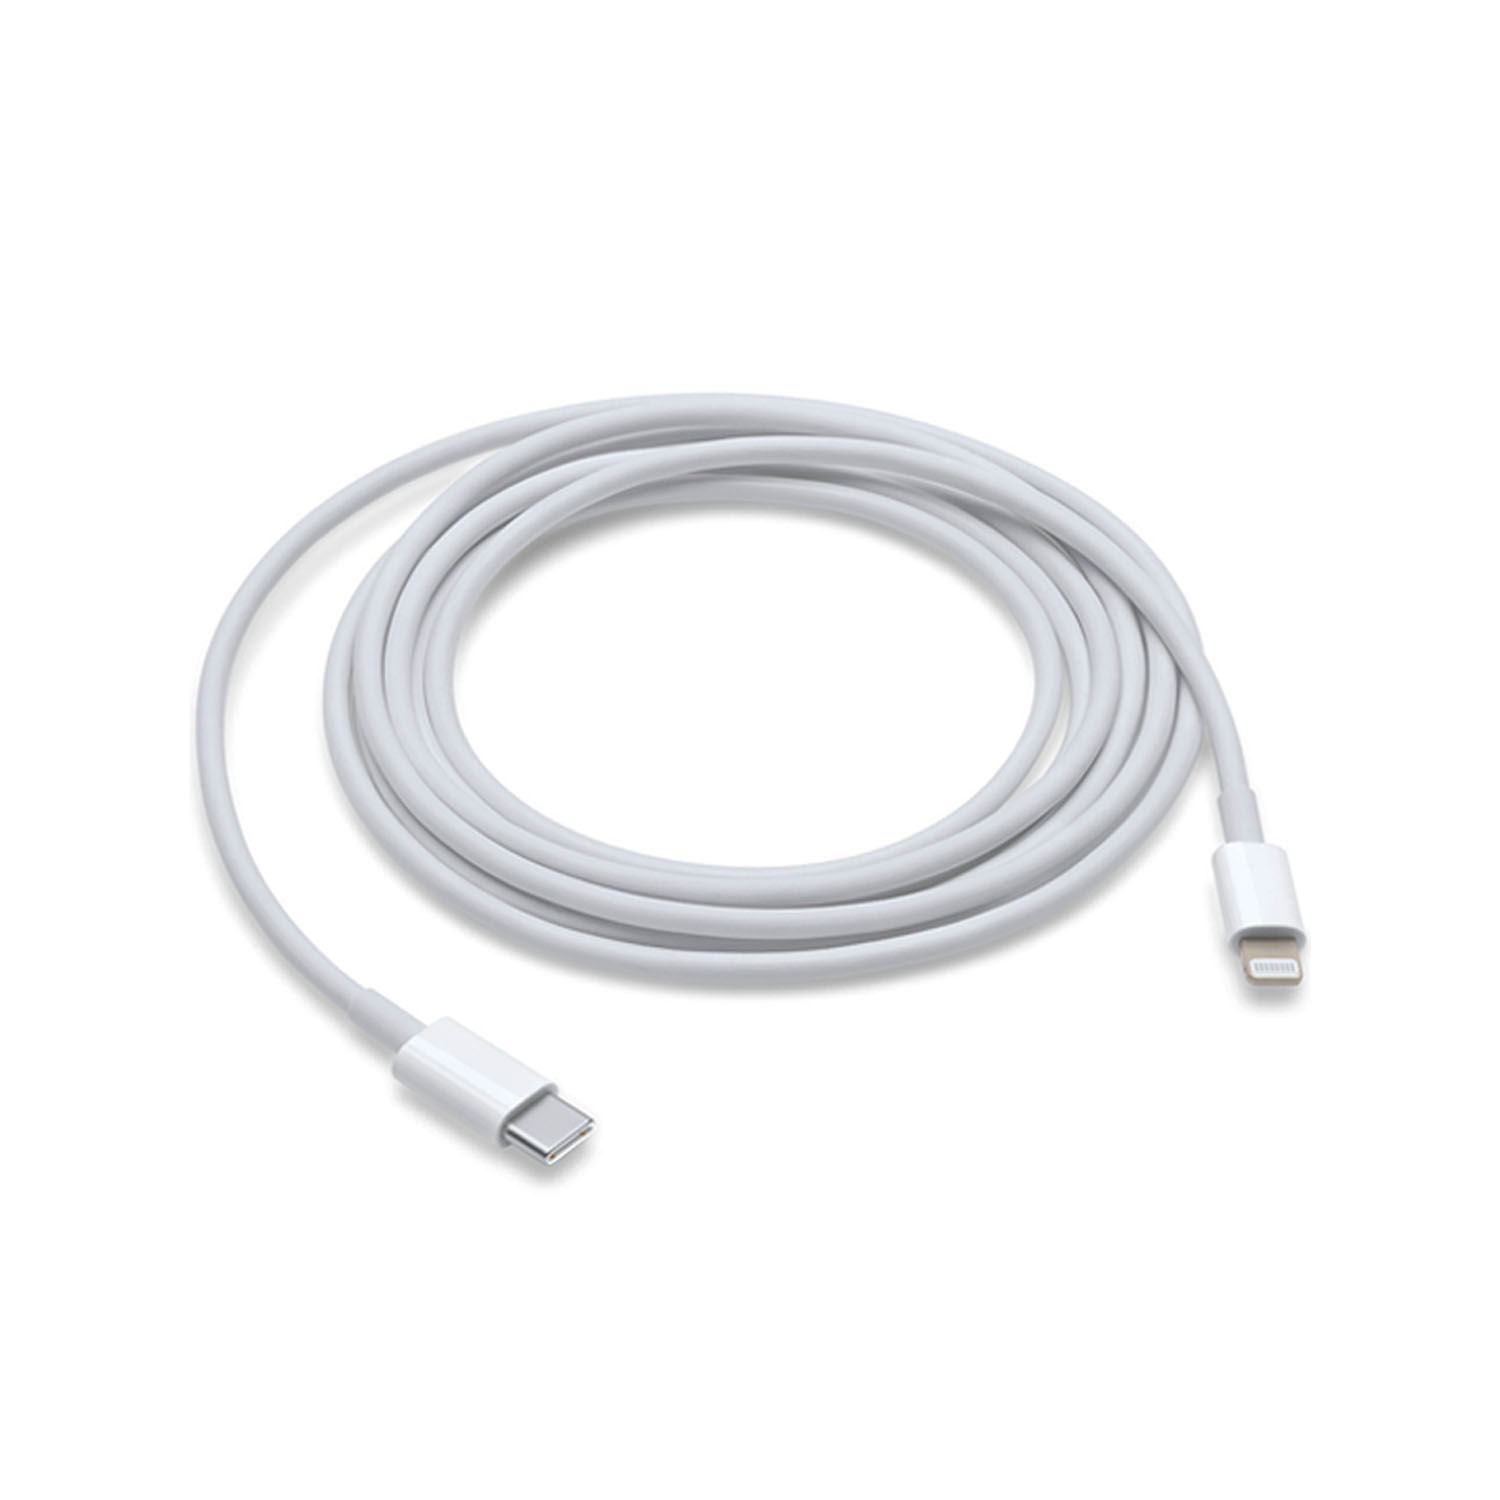 Cable USB-C a Lightning 2 metros Compatible con iPhone